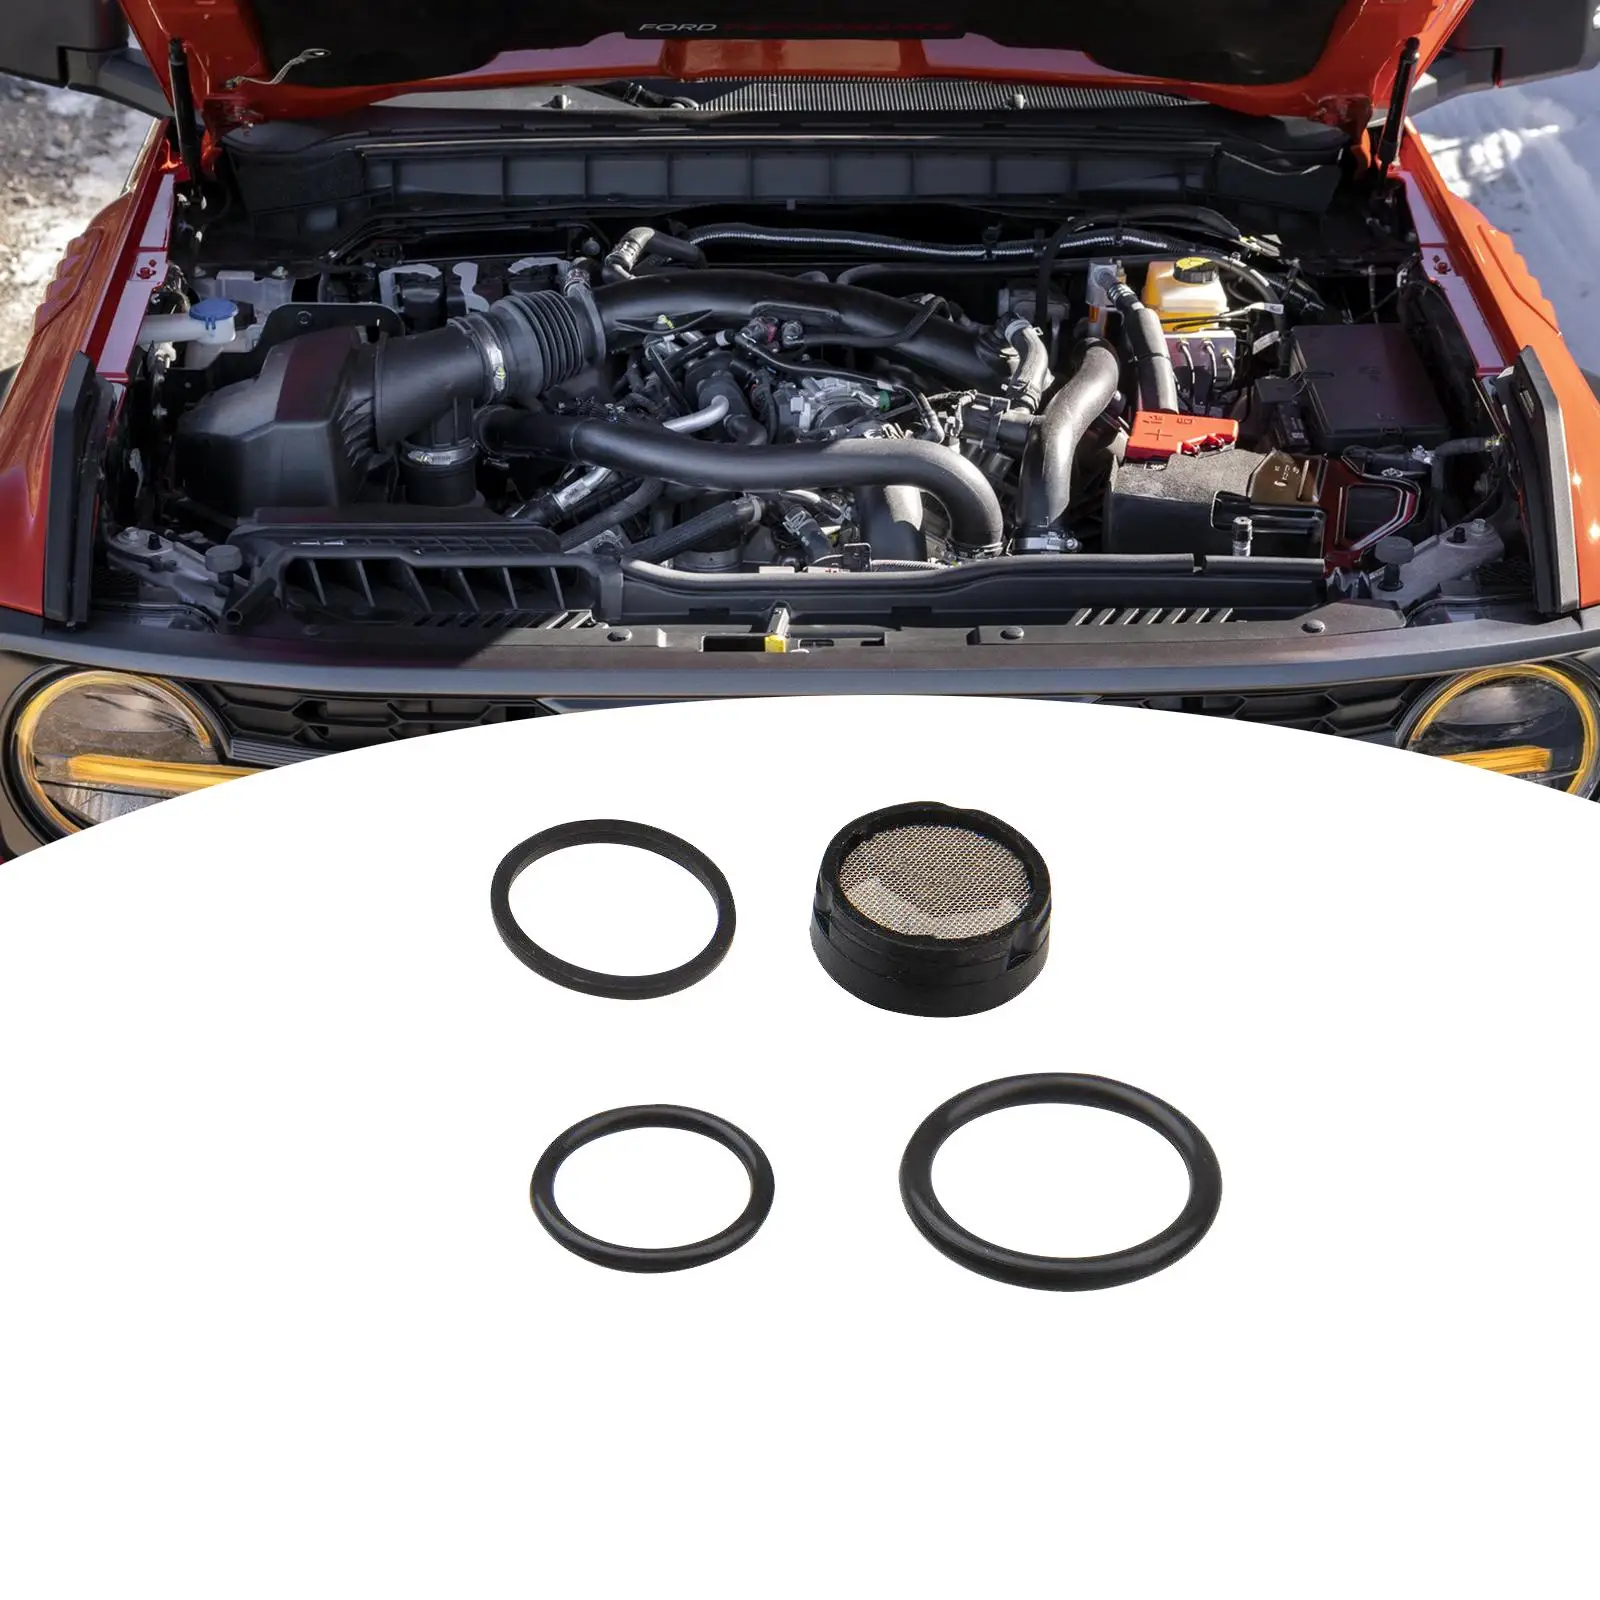 Ipr Seal Screen Kit Replace for Ford 6.0L Powerstroke Diesel Super Duty